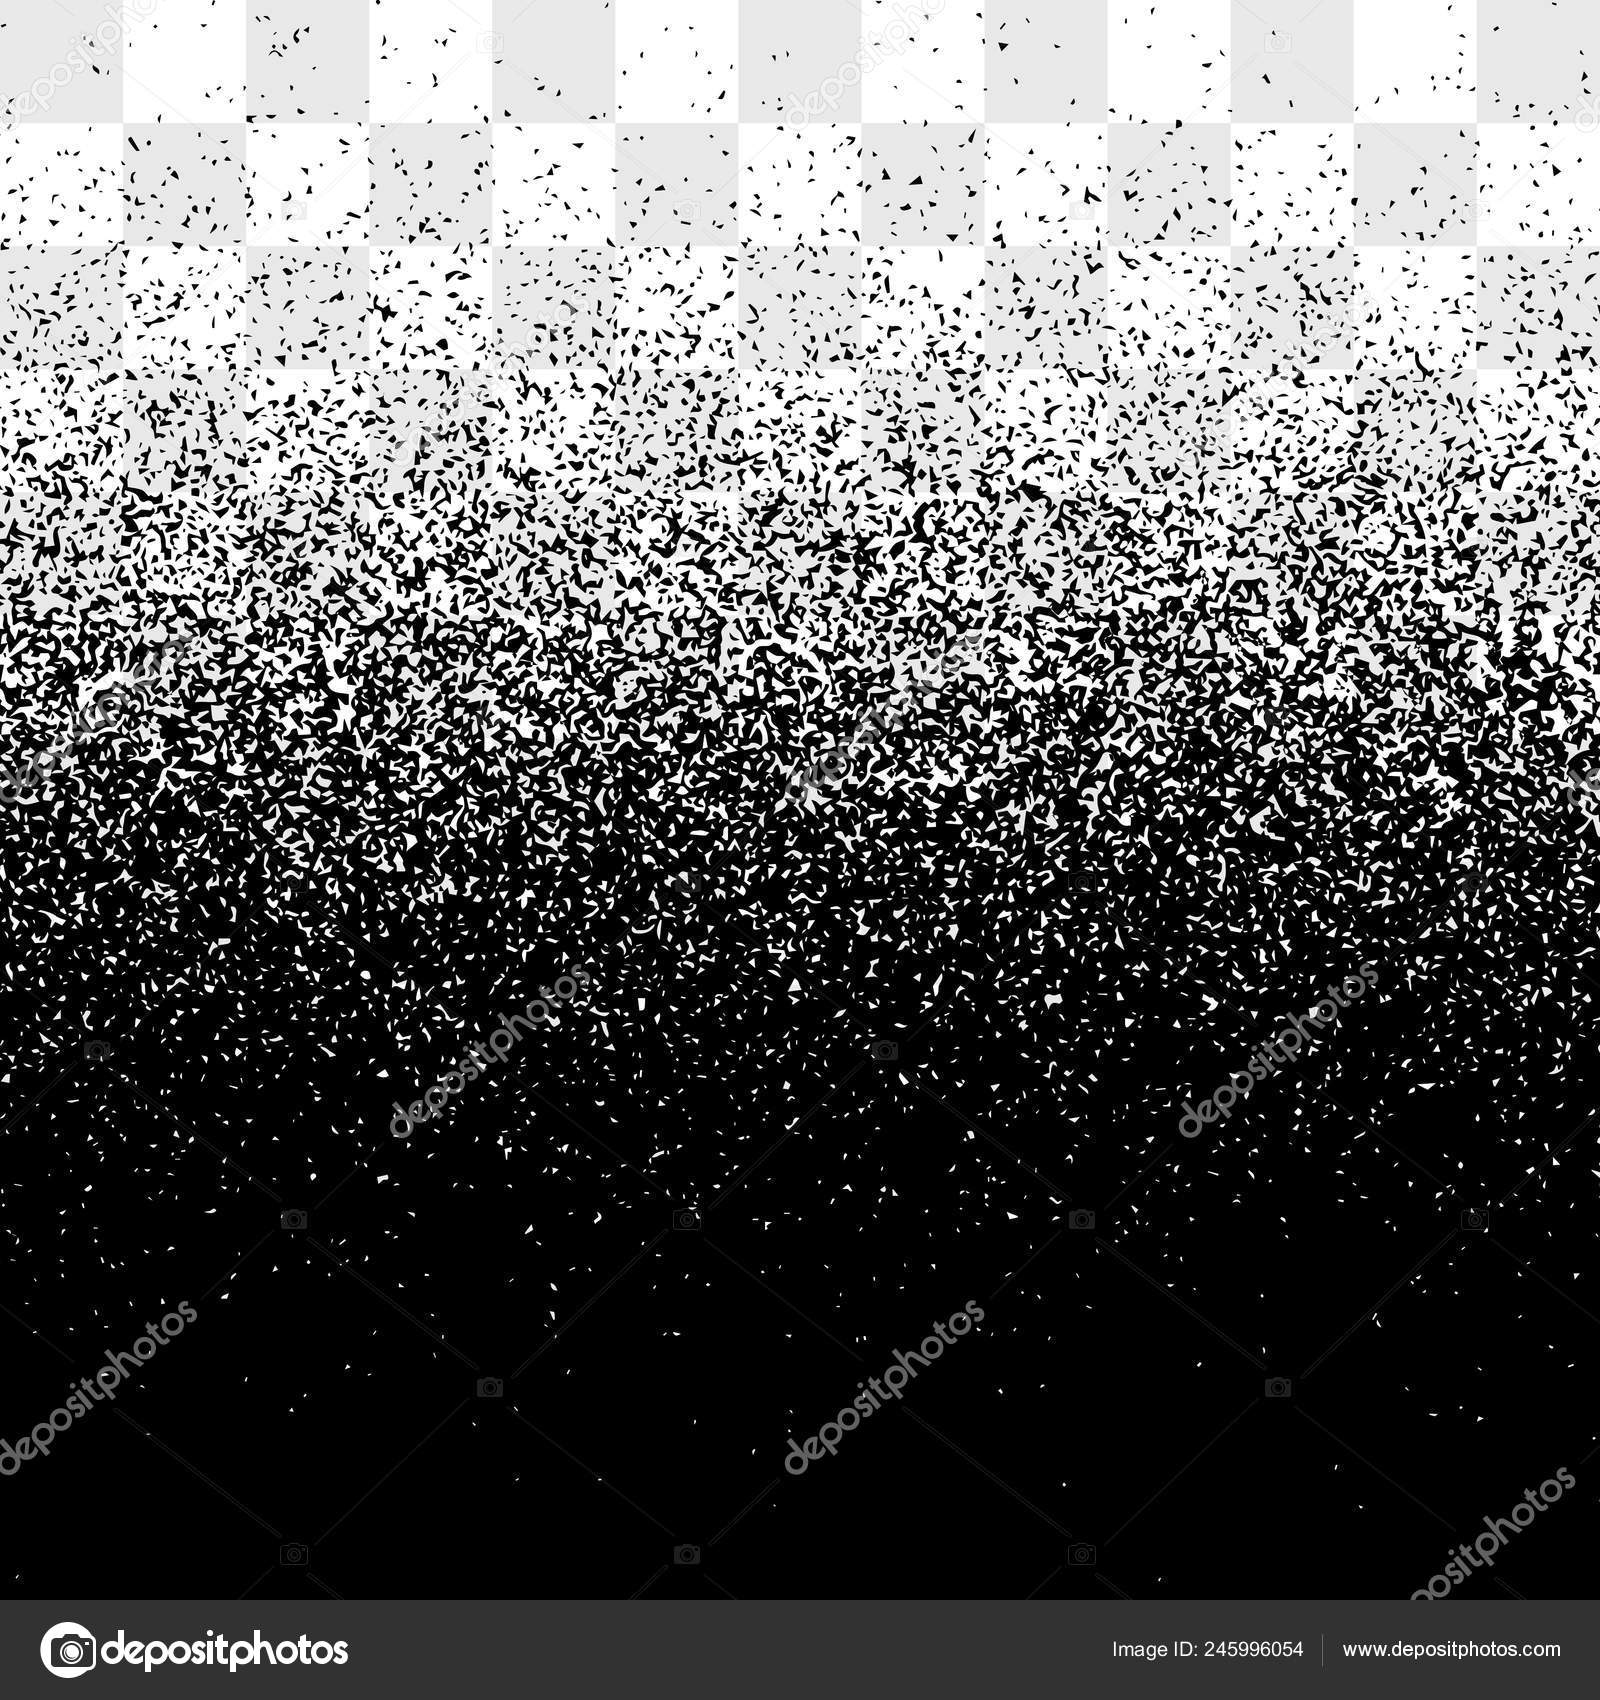 Grain Gradient Vector Transparent Background Black And White Old Noise Texture Grainy Backdrop Effect Clipart Vector Image By C Vladwel Vector Stock